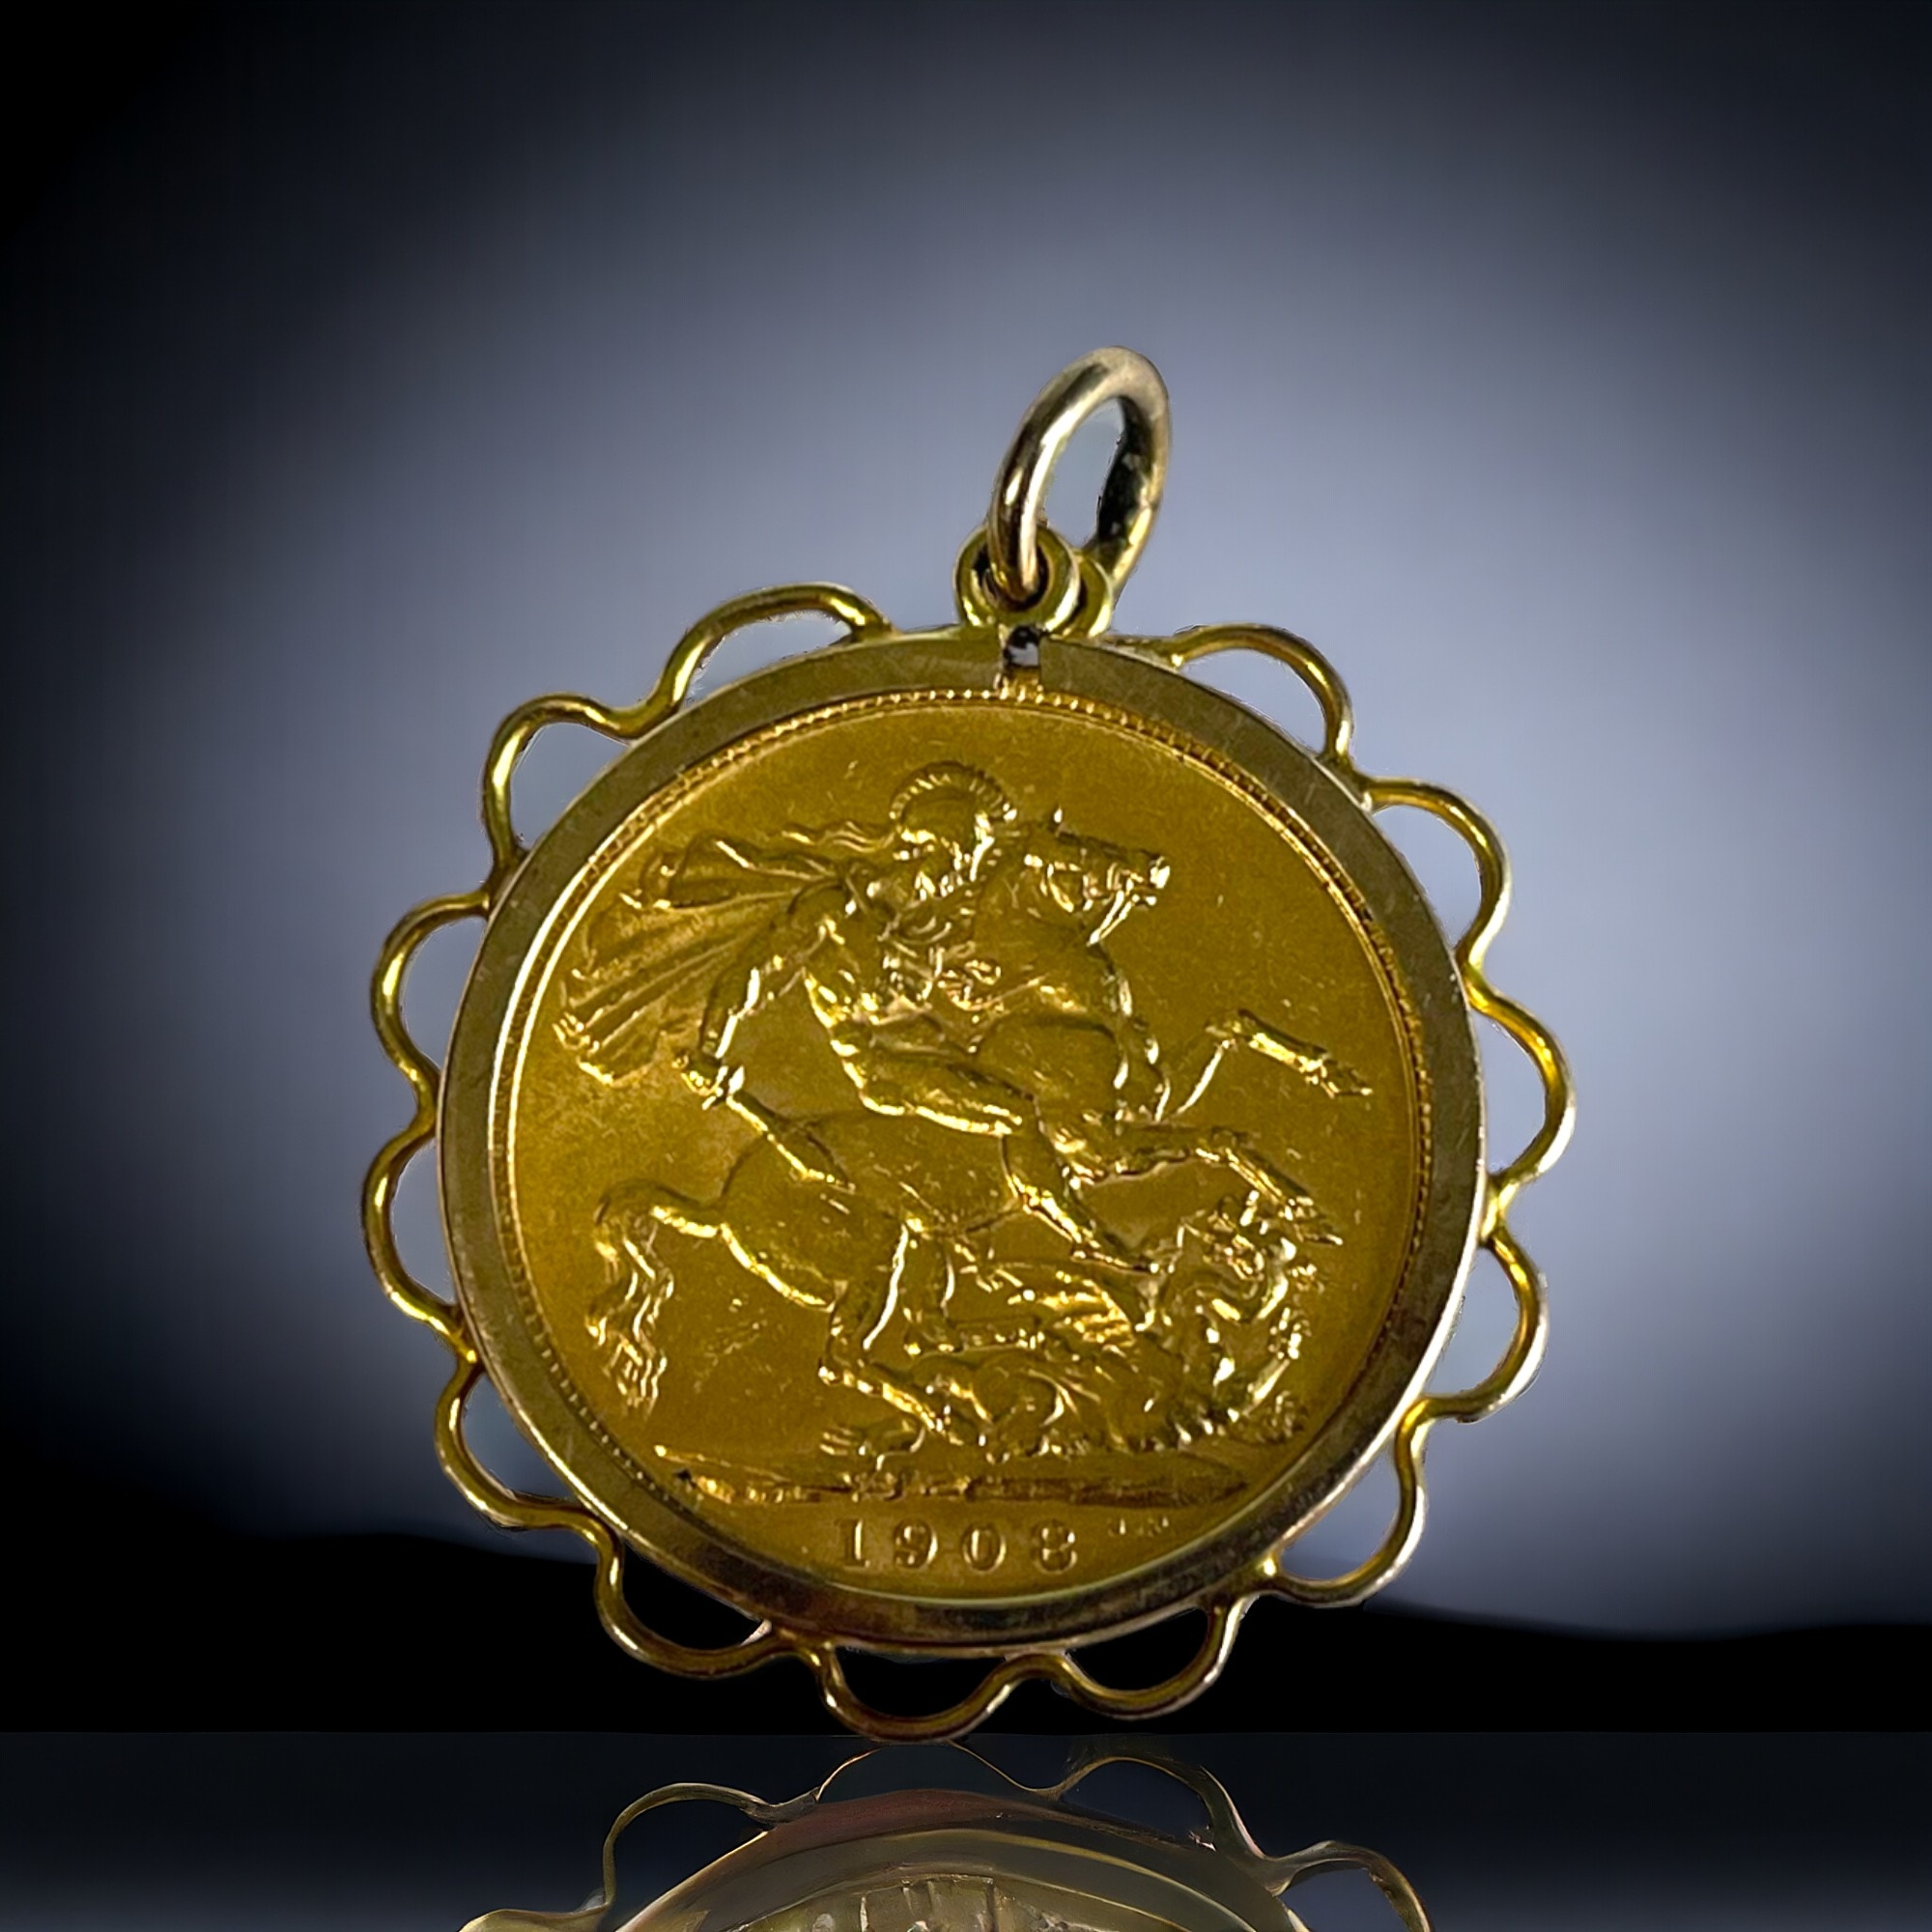 AN EDWARD VII 1908 FULL SOVEREIGN PENDANT. In 9ct Gold pendant mount. weight - 10g 27mm Diameter - Image 2 of 4